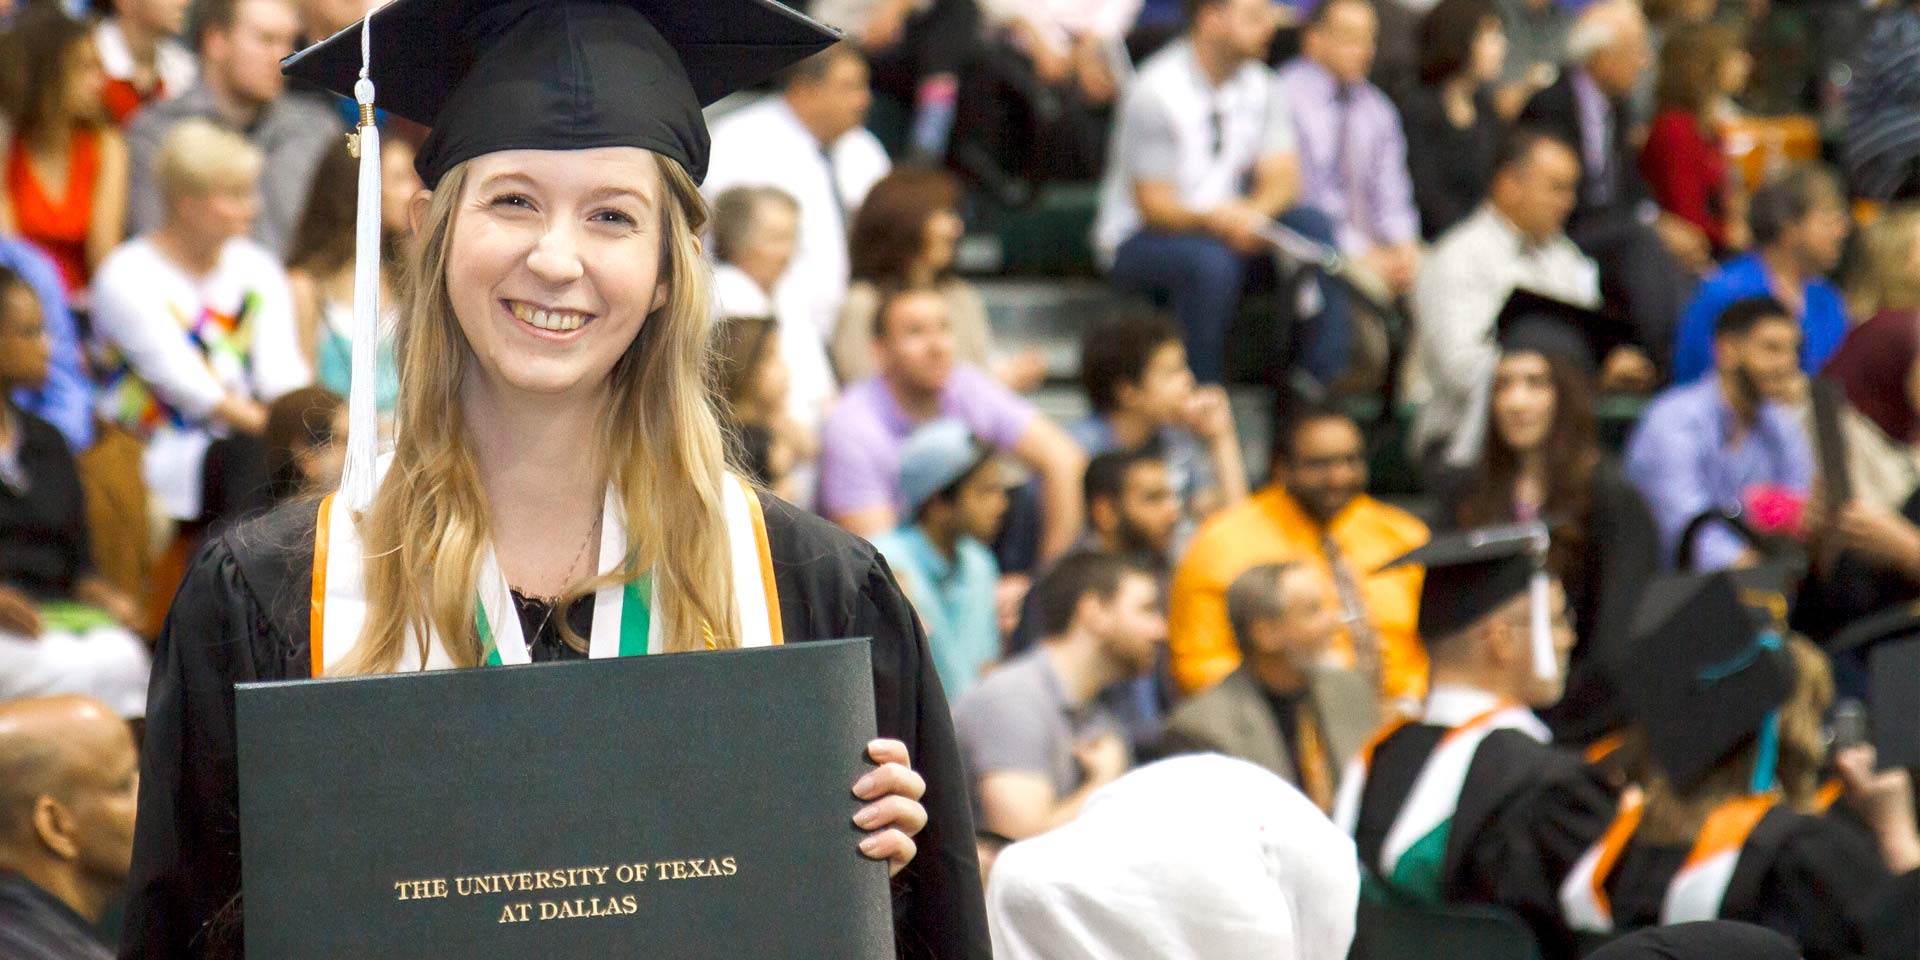 Jindal School bachelor's in human resource management graduate on UT Dallas commencement day